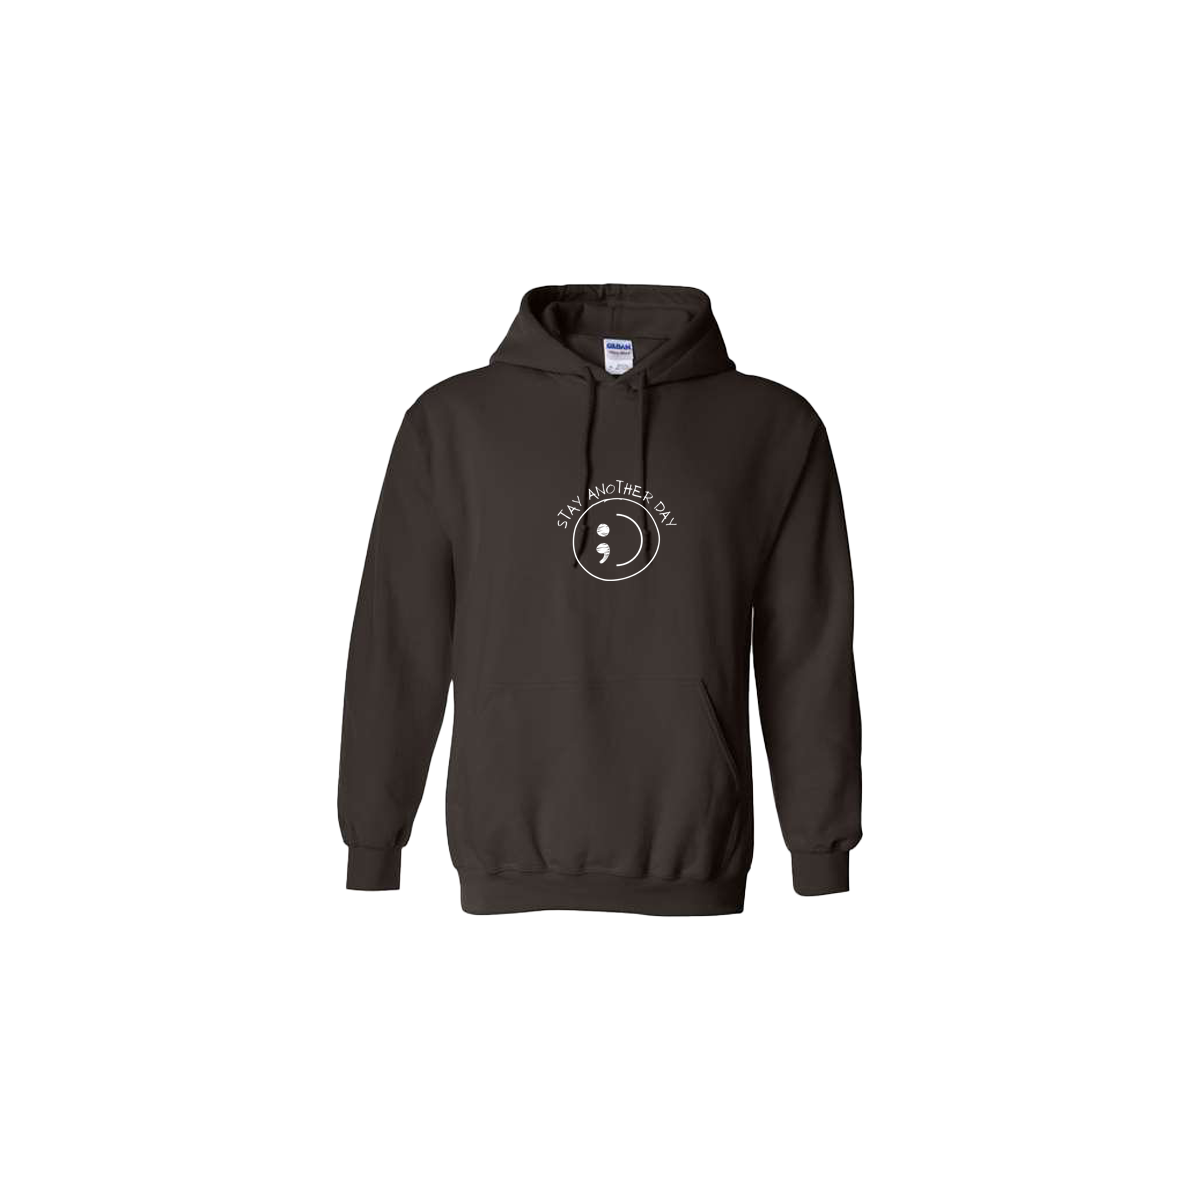 Stay Another Day Smiley Face Embroidered Brown Hoodie - Mental Health Awareness Clothing